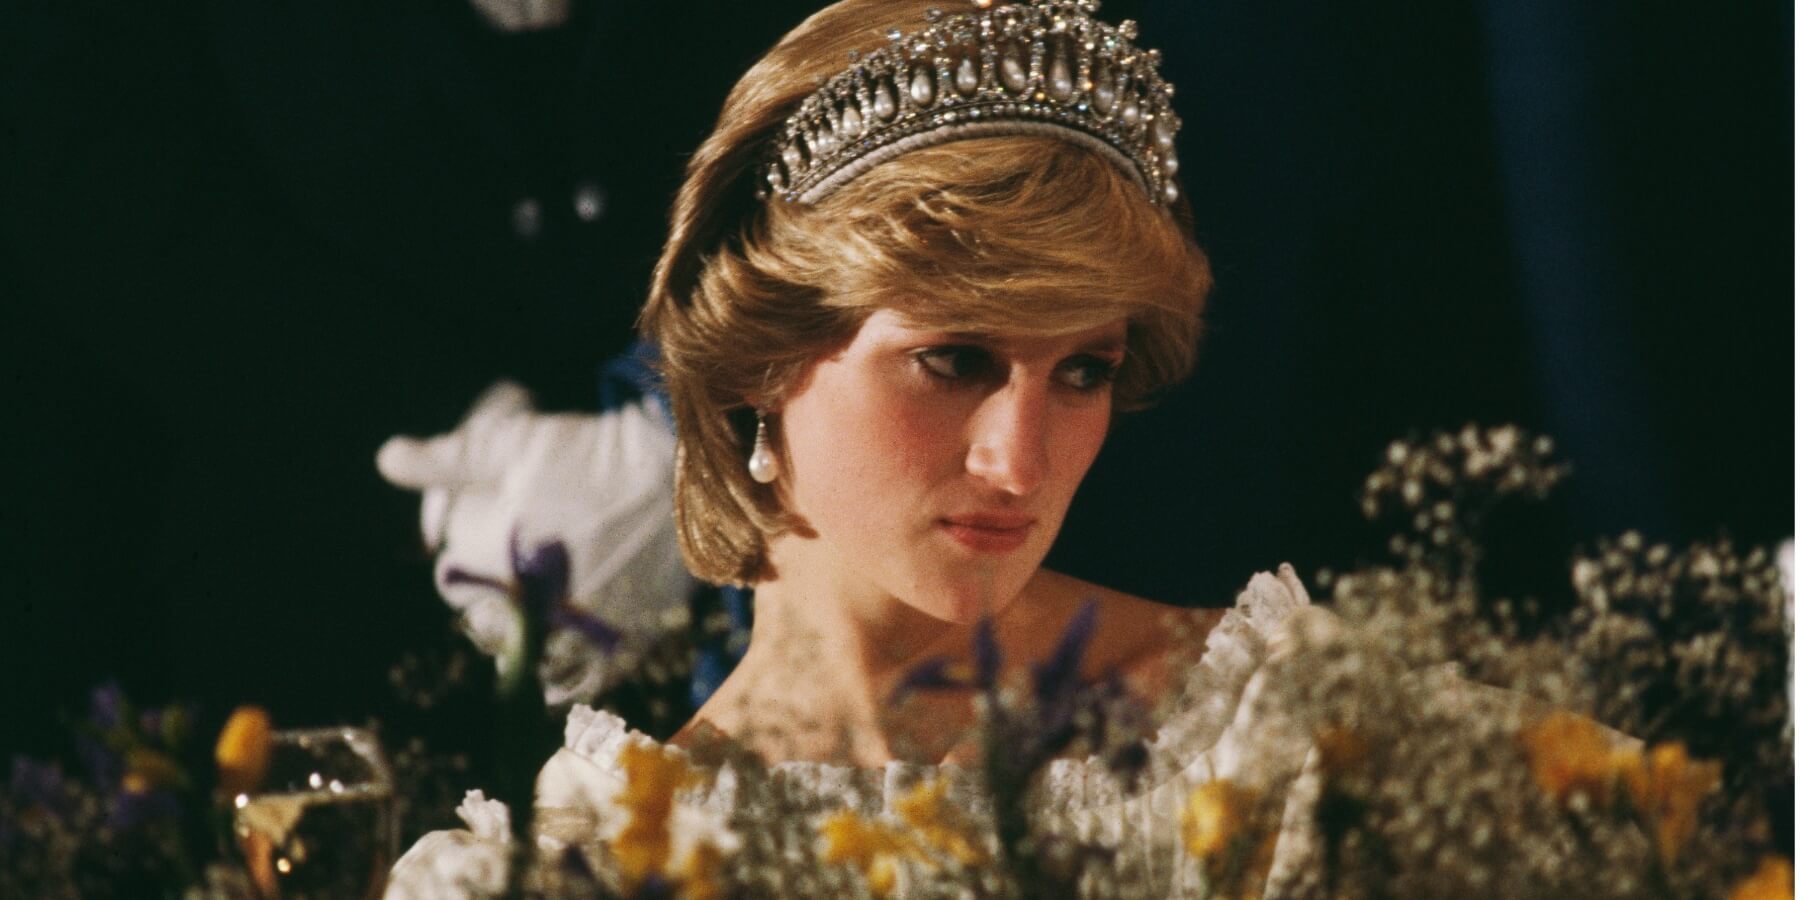 Princess Diana at a banquet in Nova Scotia during the royal tour of Canada, in June 1983. She is wearing the Queen Mary tiara.